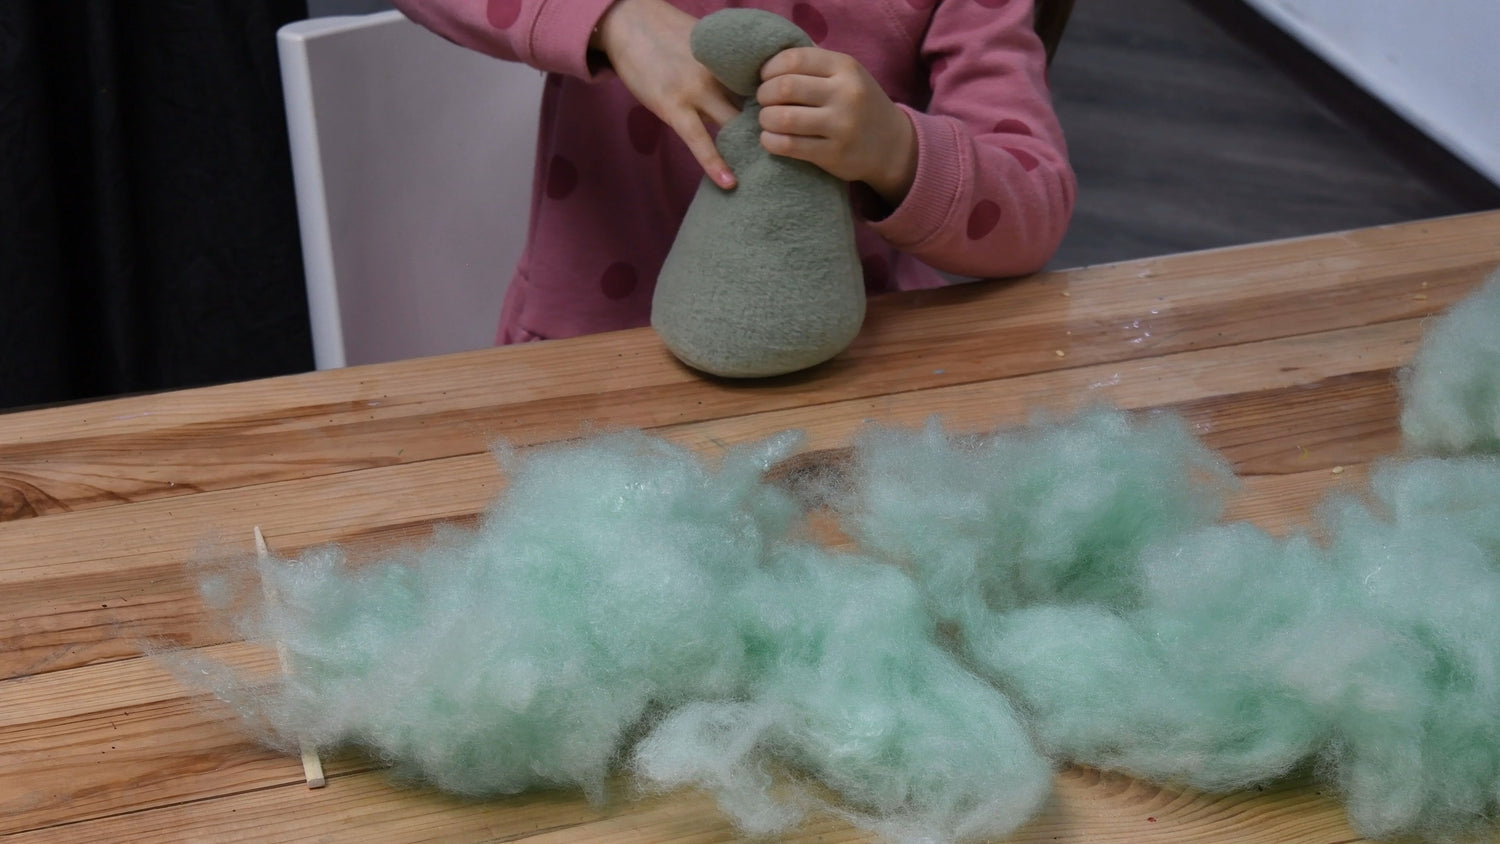 Creator building a stuffed animal with PP cotton